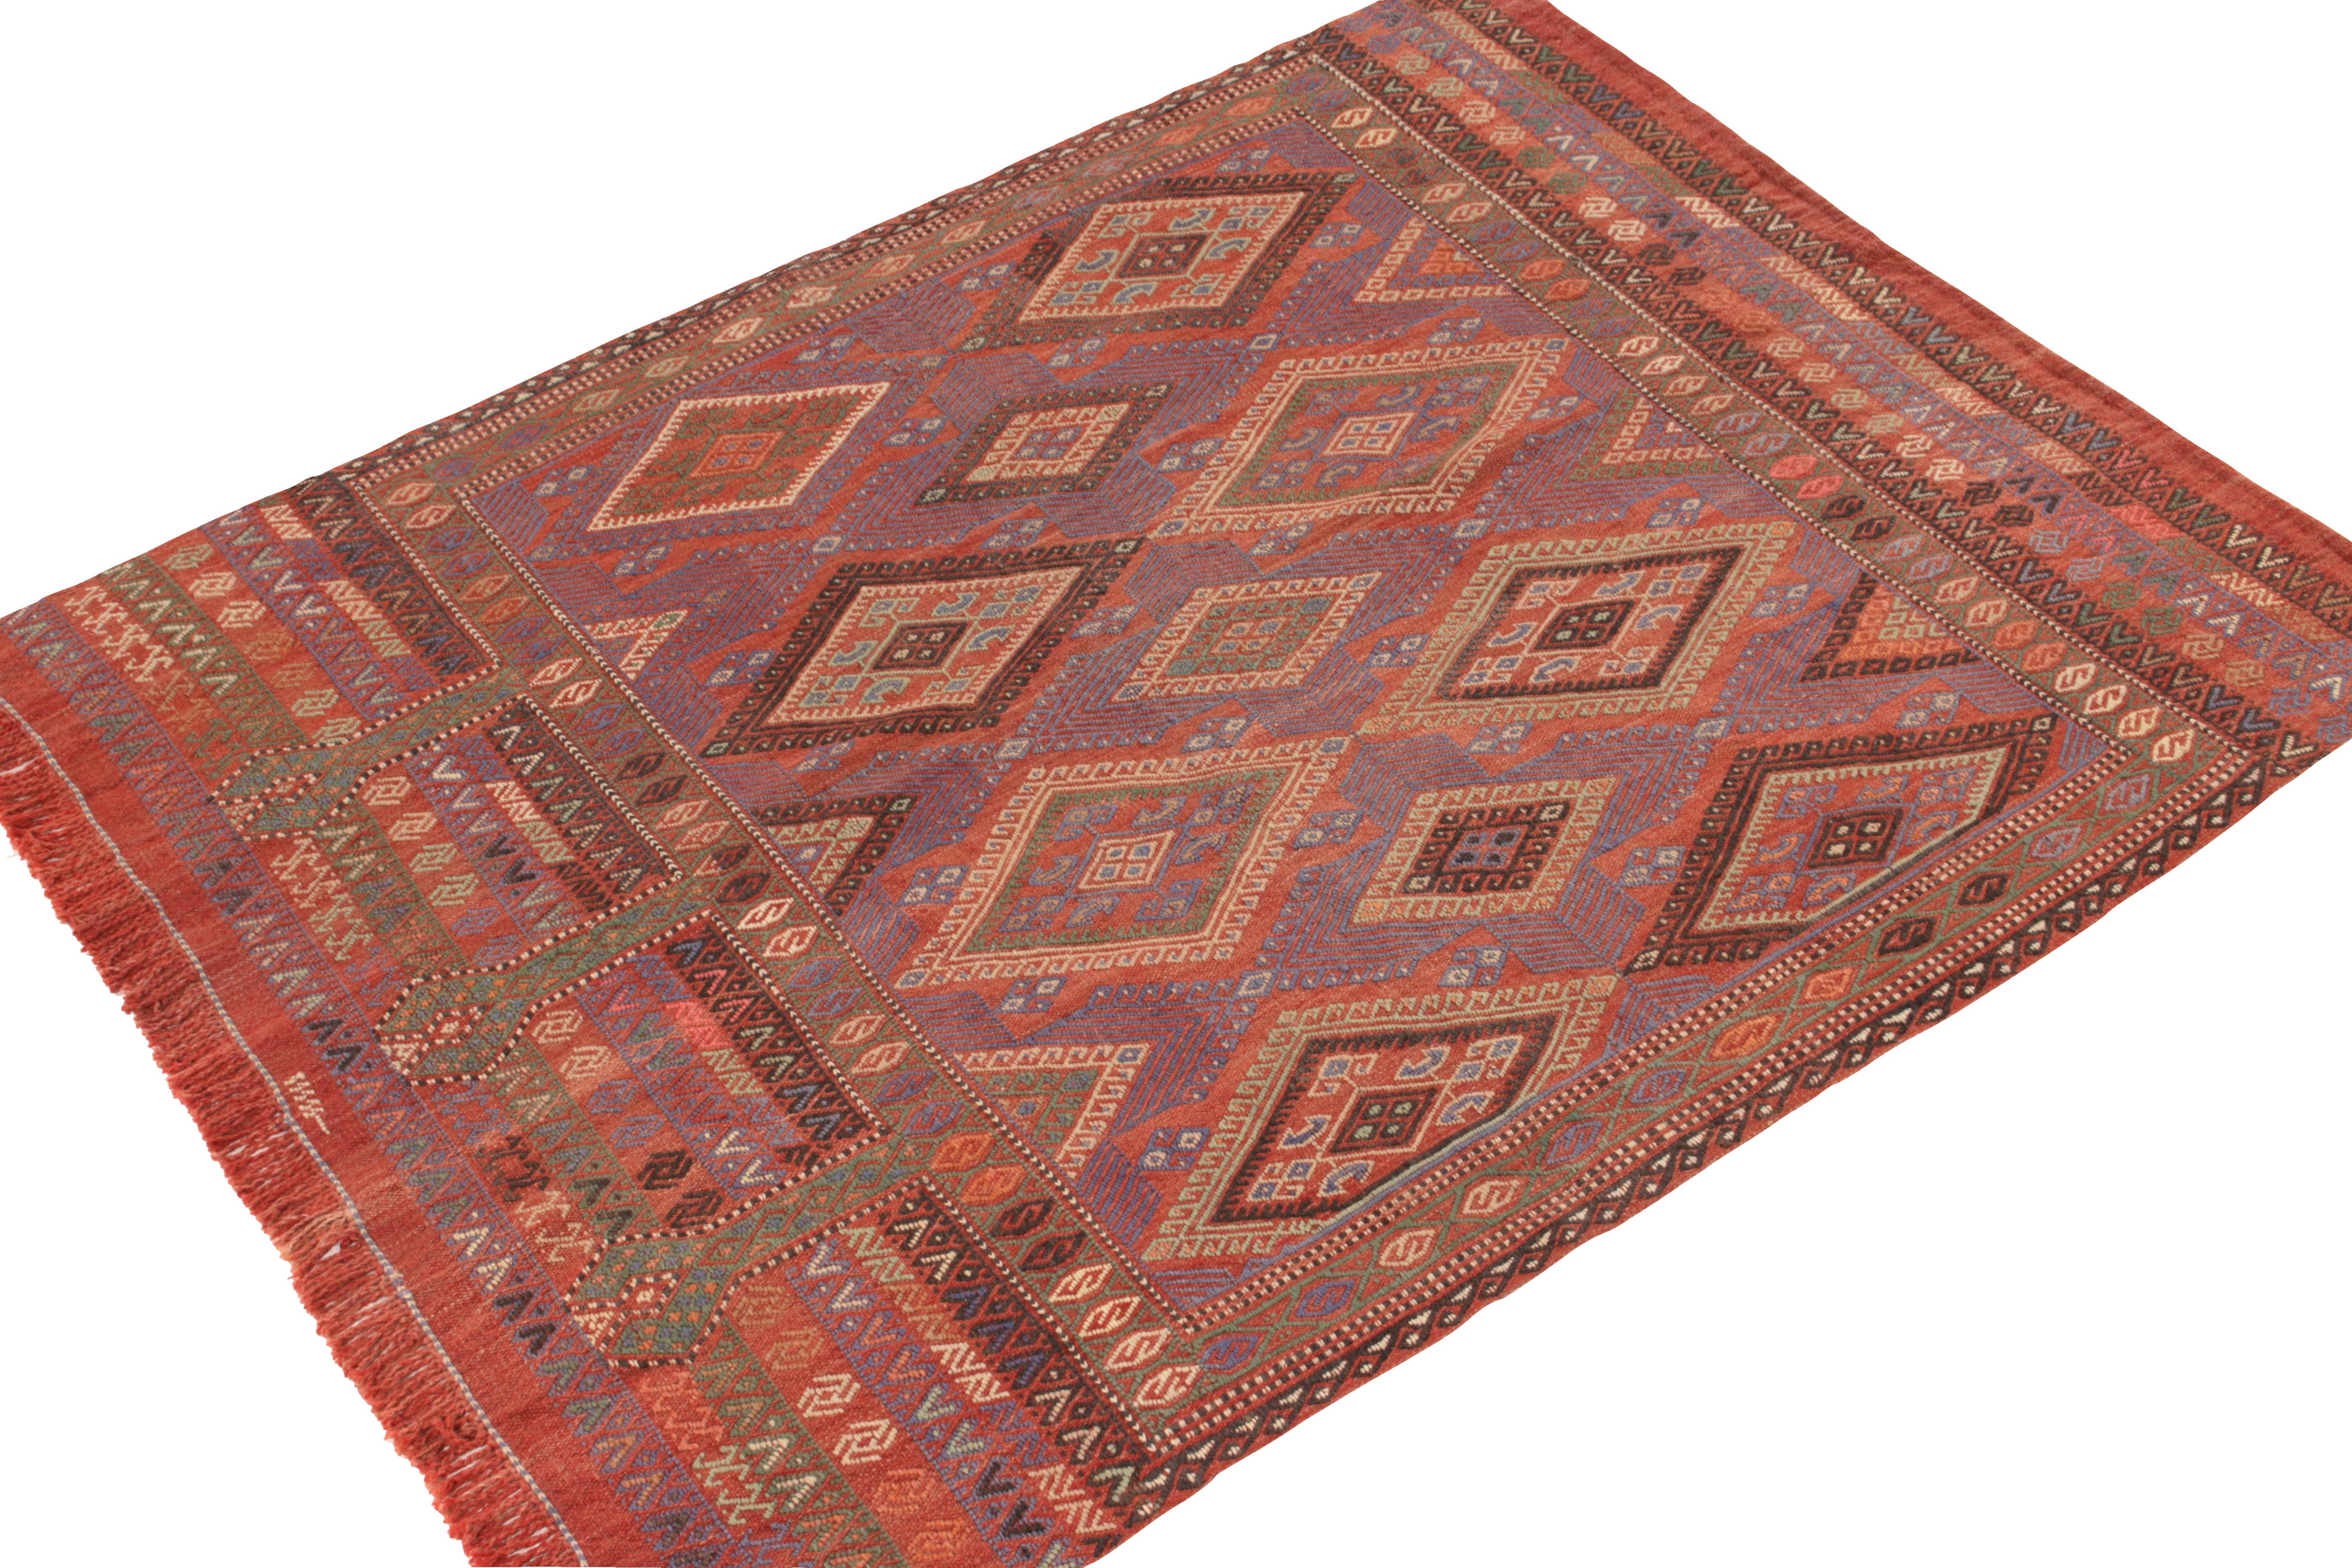 This vintage 4×6 Kilim is a rare tribal curation in Rug & Kilim’s collection. Handwoven in wool, it originates from Turkey circa 1950-1960.

The design favors vibrant colors in a polychromatic style, though oranges and blues are among the dominant